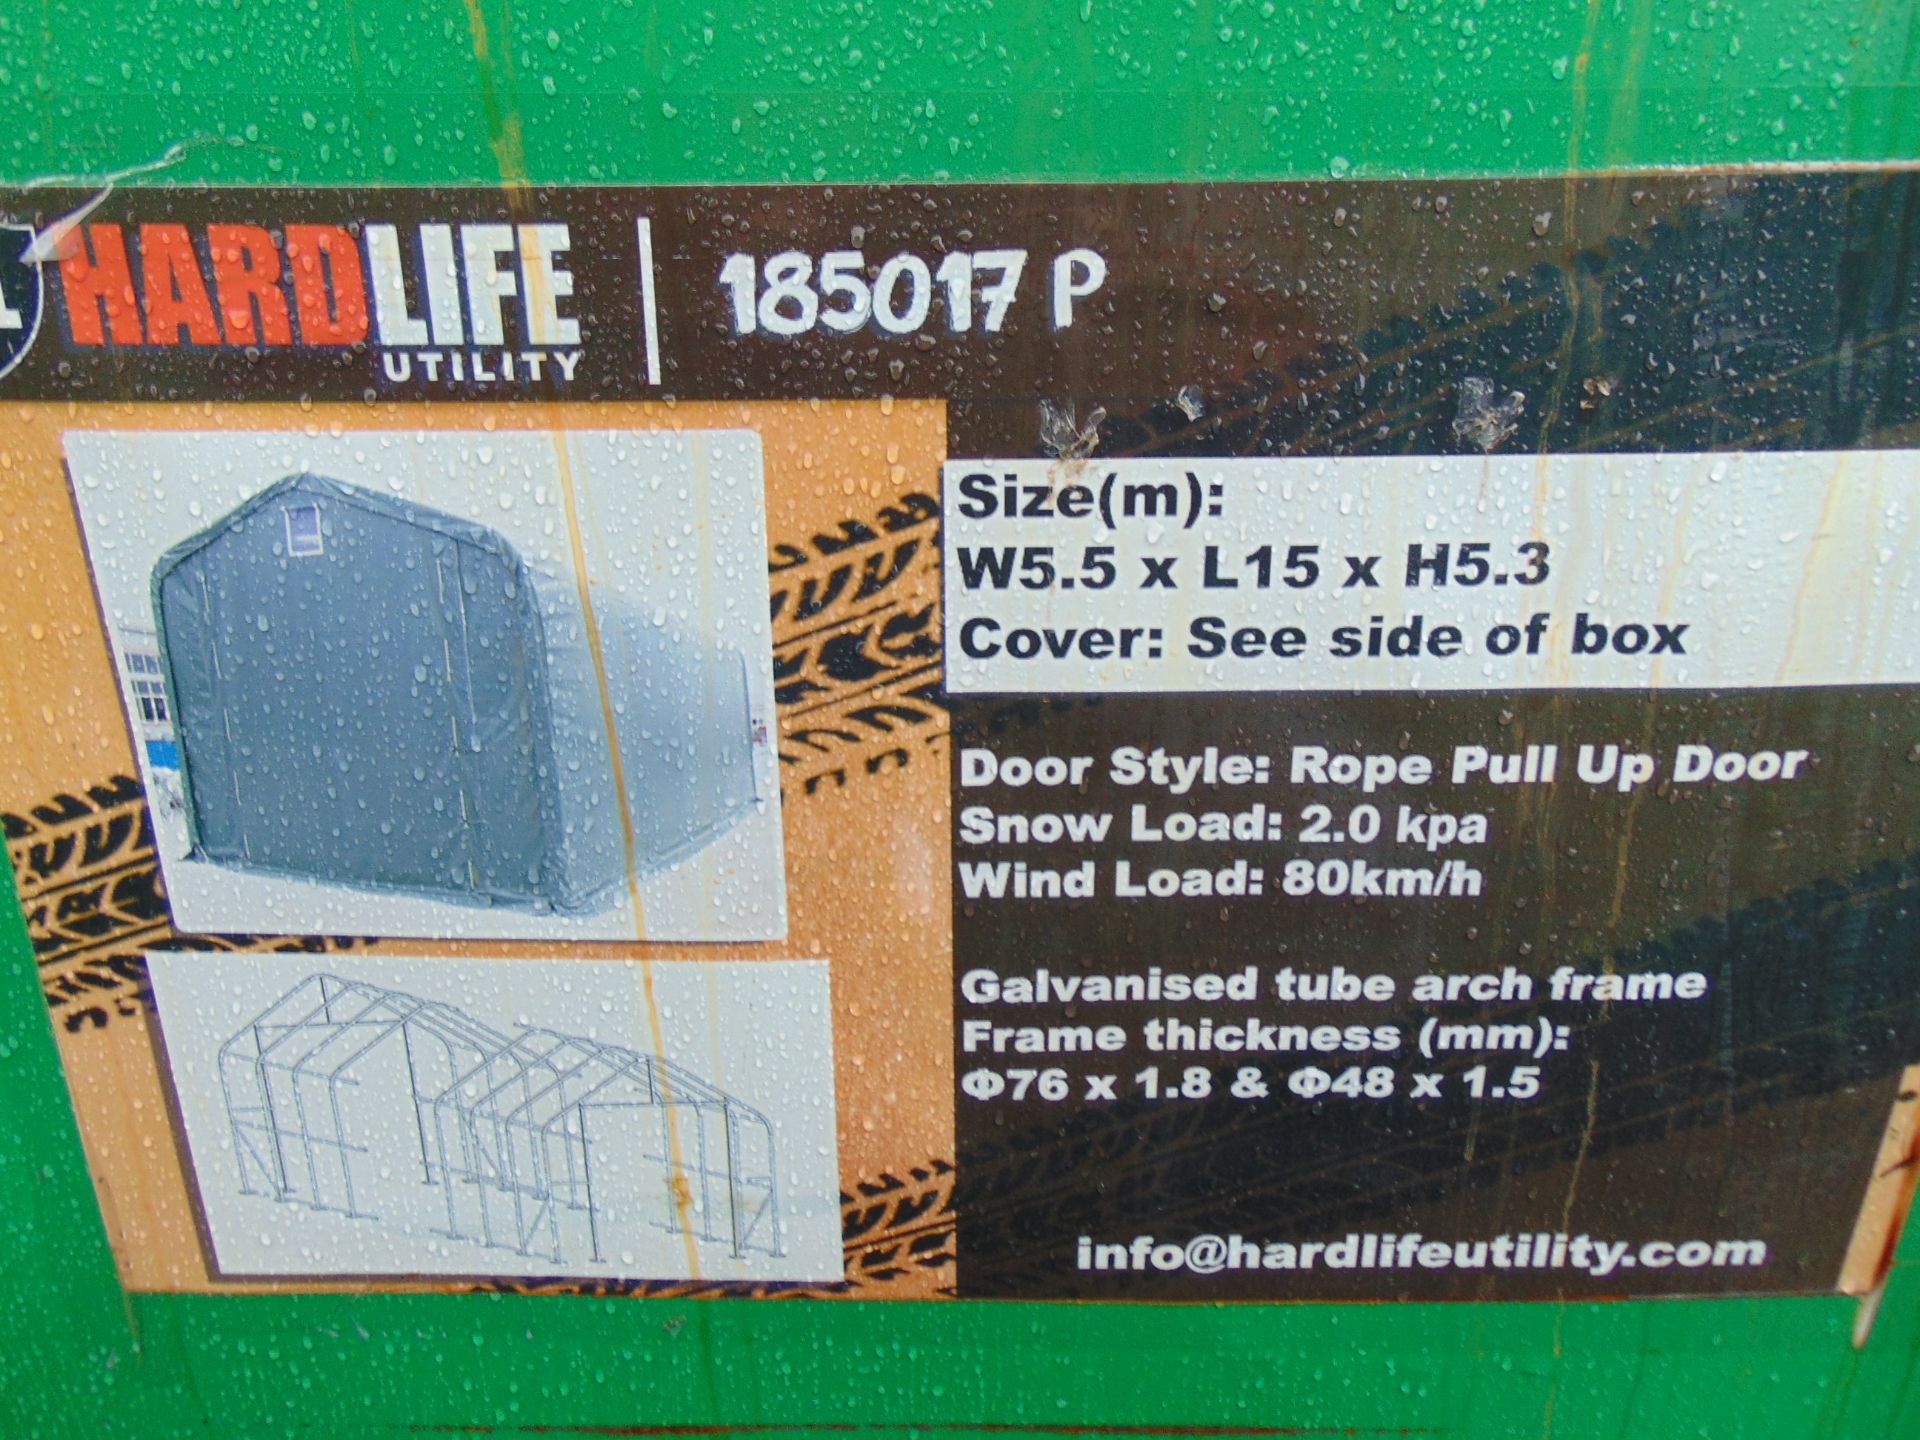 Heavy Duty Hardlife Building 18 ft Wide x 50 ft Long x 17 ft High P/No 185017P Military Green - Image 3 of 4